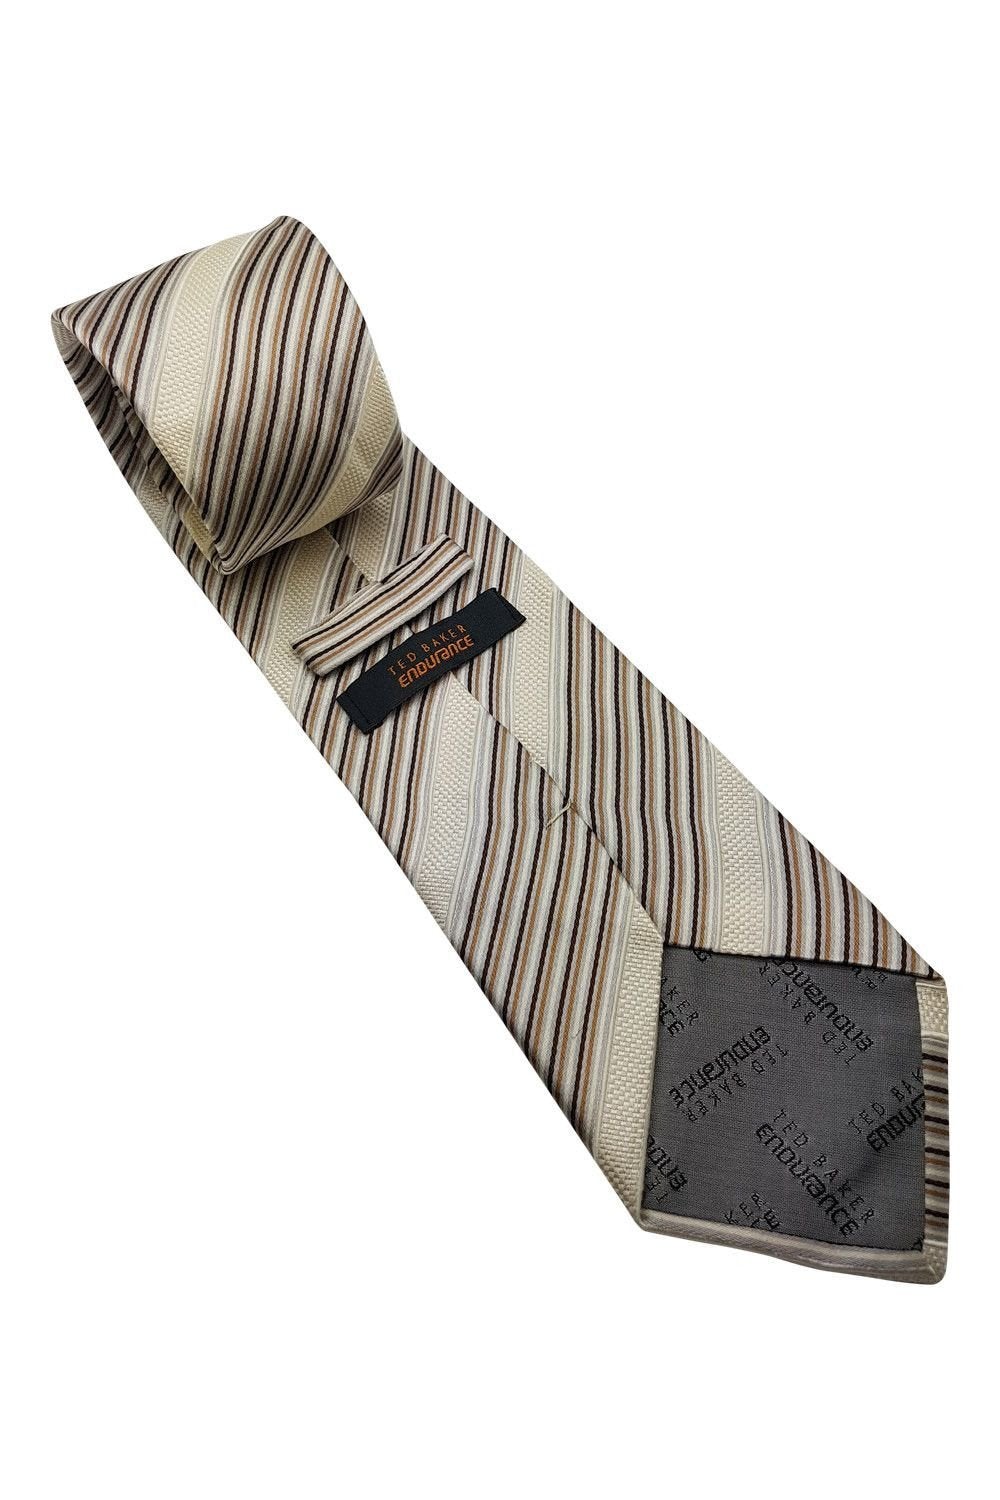 TED BAKER Endurance Ivory Striped Silk Tie (61")-Ted Baker-The Freperie